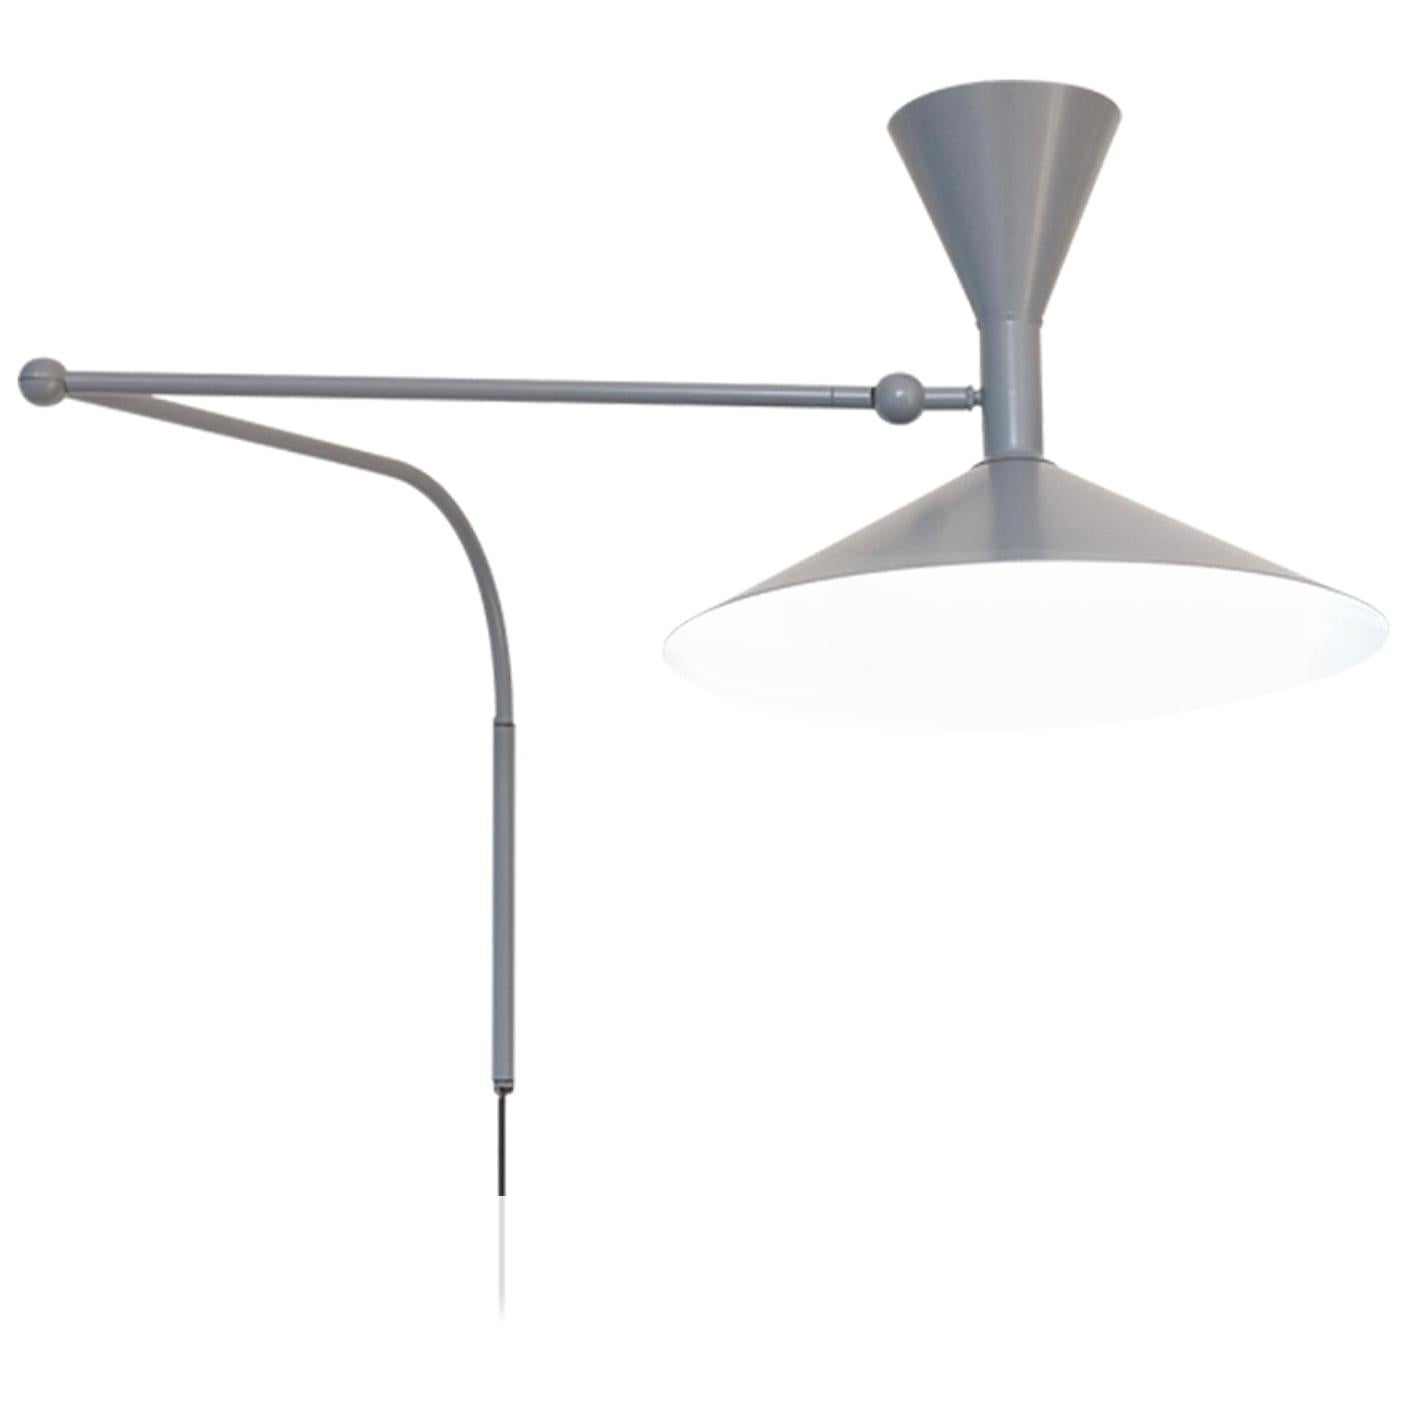 Lampe de Marseille by Le Corbusier. Current production designed and manufactured in France by Nemo Lighting. Wired for U.S. standards. Spun aluminum diffuser. Adjust via two joints on the arm and a rotating wall joint. Provides direct and indirect